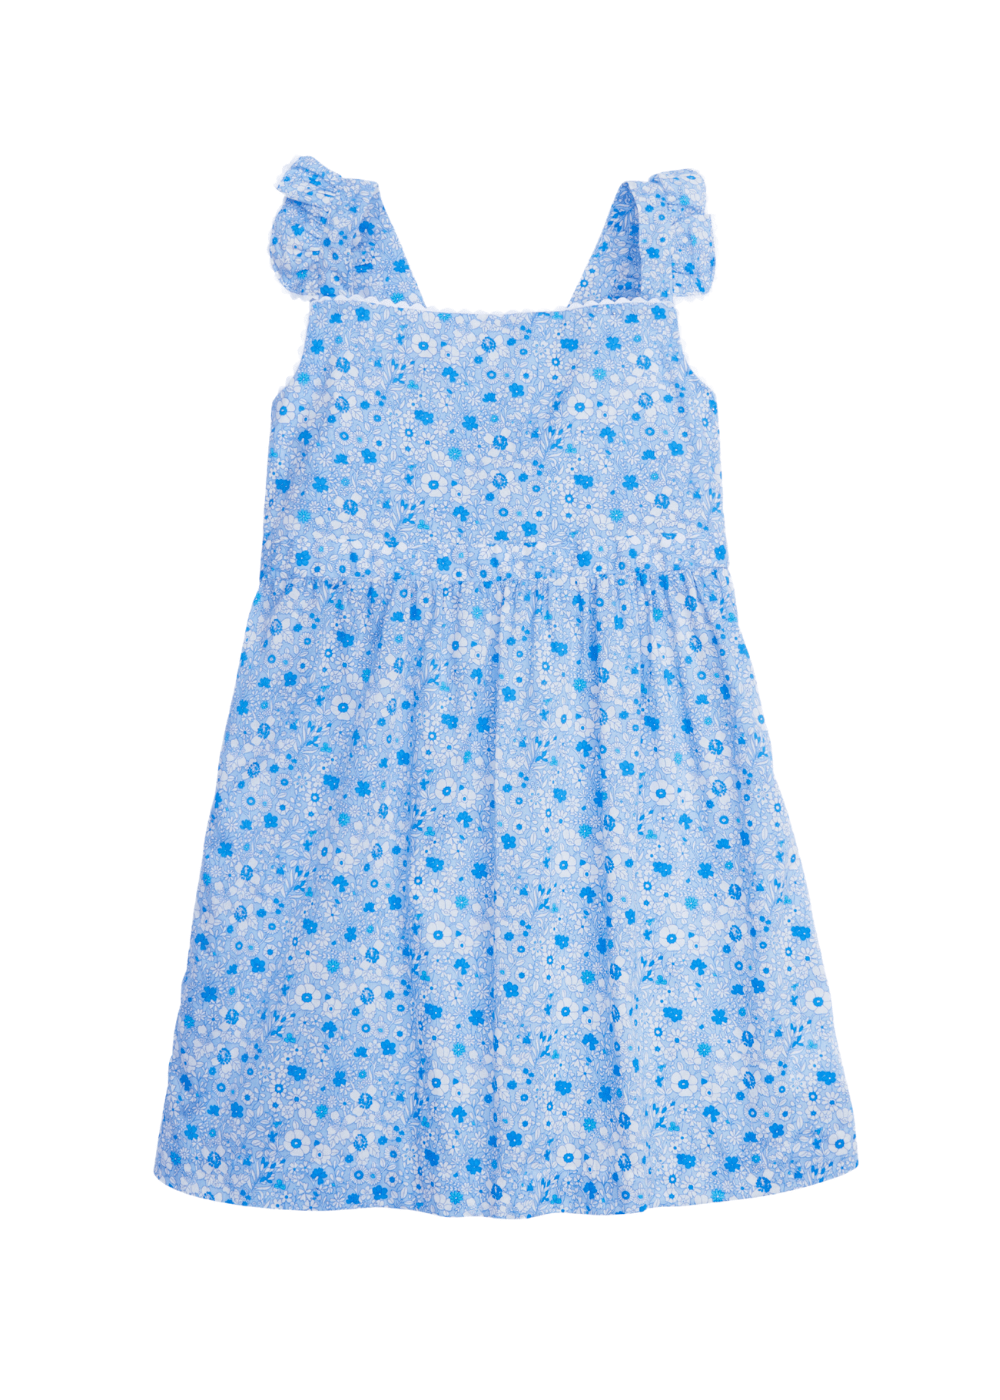 classic childrens clothing girls blue and white floral sundress with ruffled straps and ric rac trim